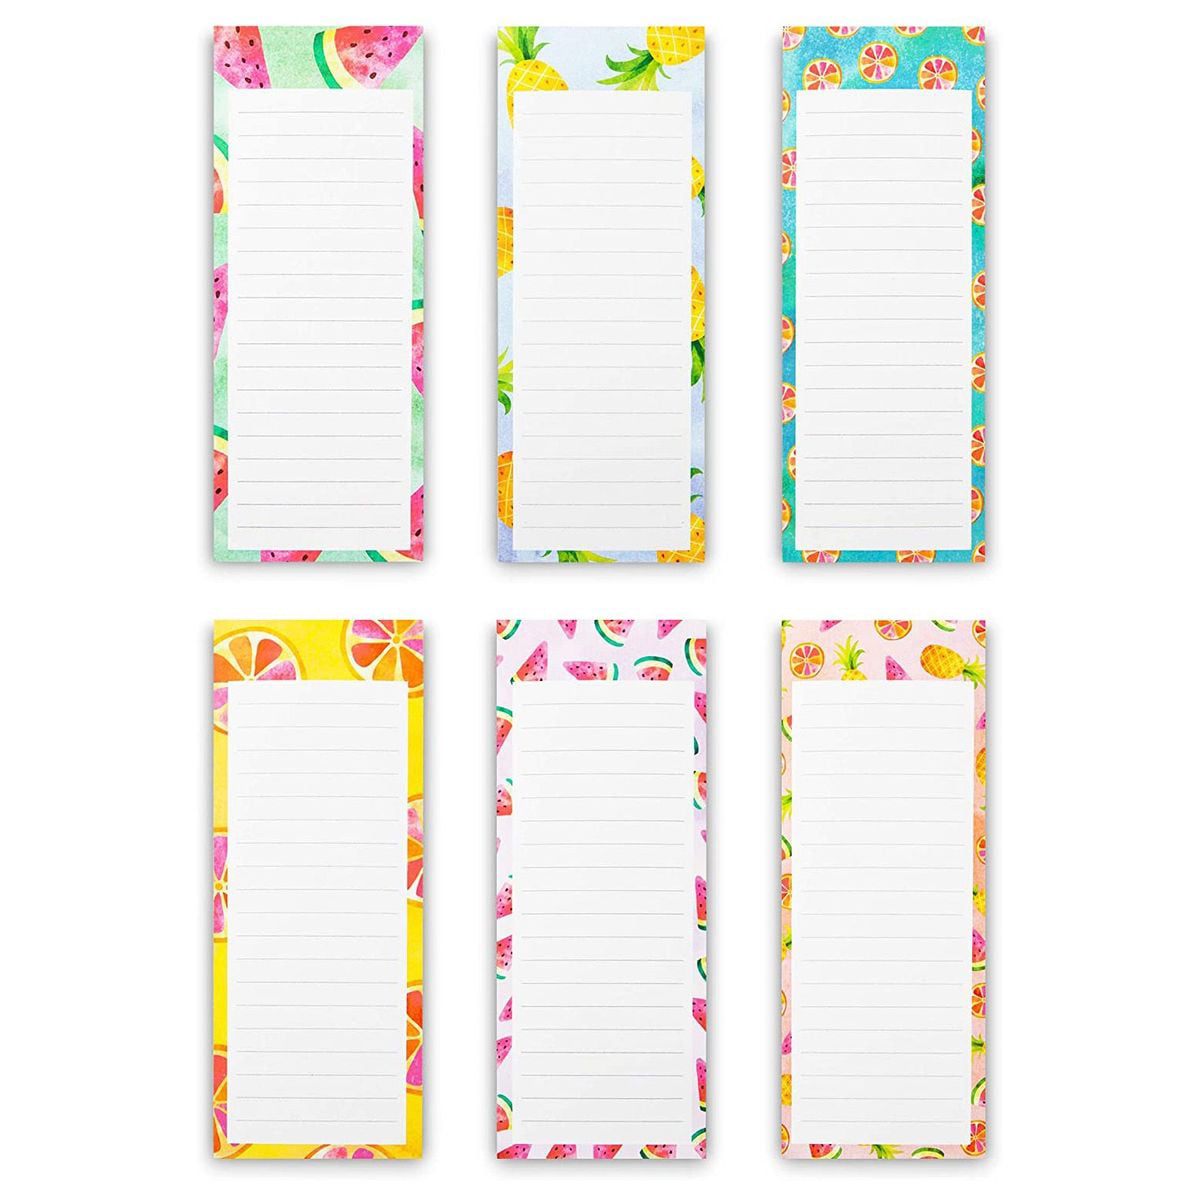 B-THERE Bundle of 4 Magnetic List Pad Notepad with Magnetic For Grocery,...